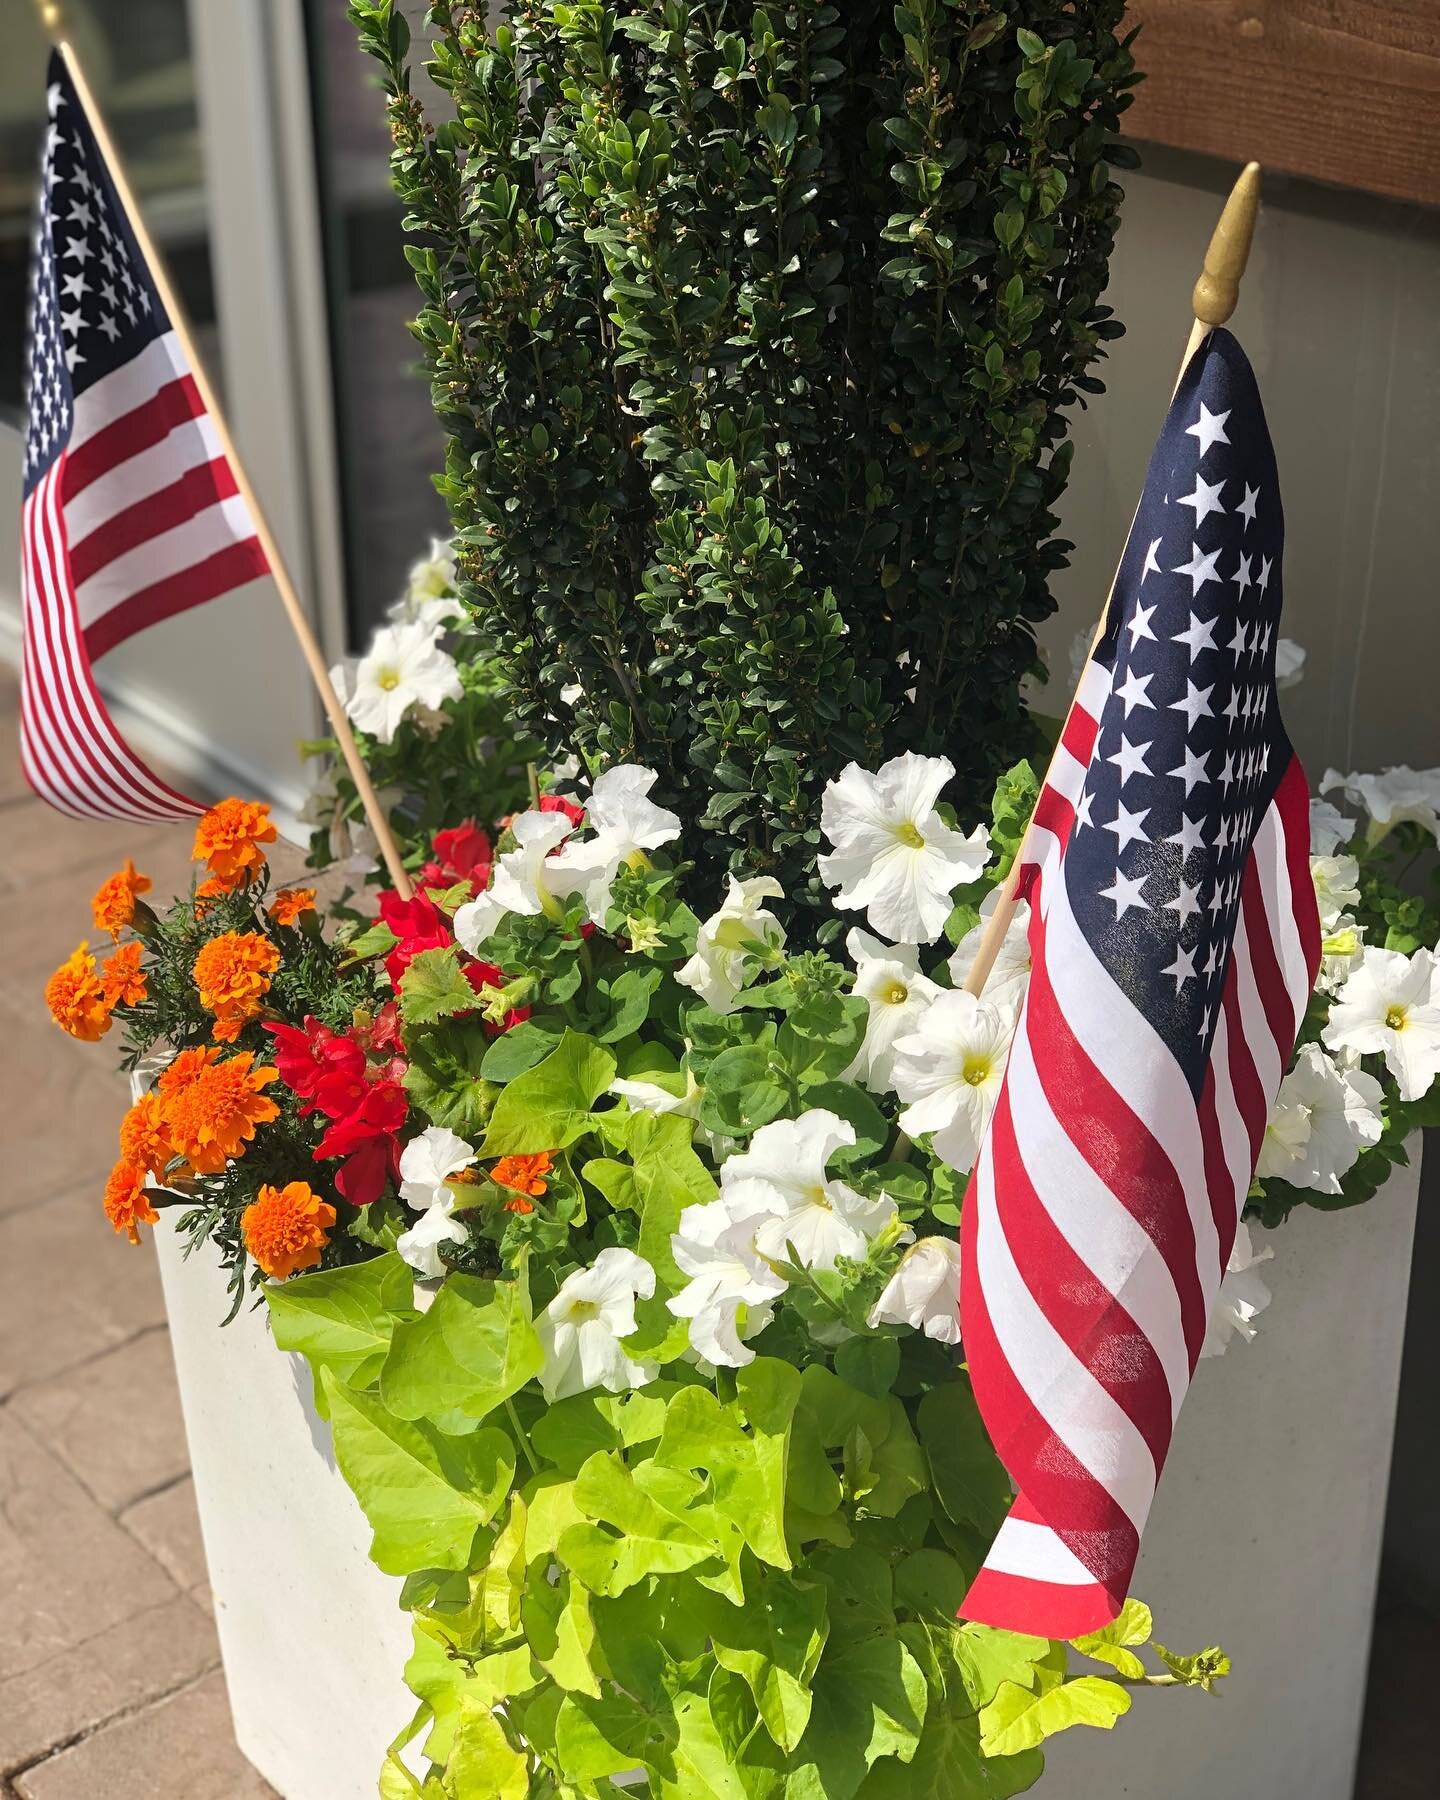 We will be closed on the 4th of July at The Cove &amp; The Hammond Kitchen. ⠀
⠀
We are open tomorrow for a bright and sunny brunch and sunset dinner. ⠀
⠀
Have a wonderful time with your family and friends and we will see you soon!